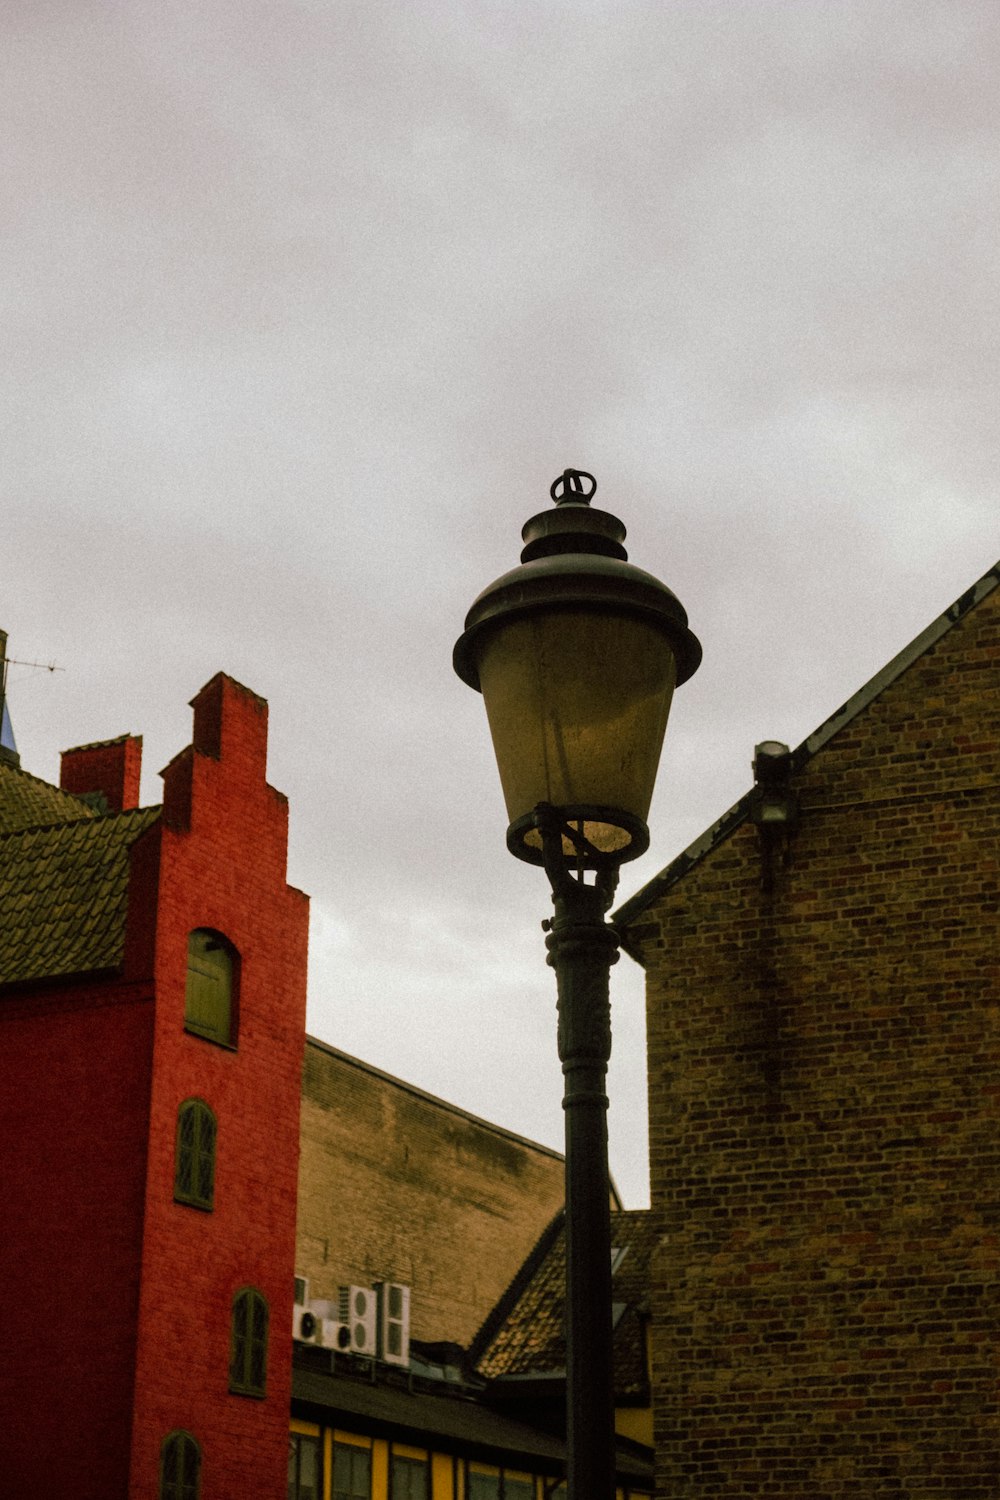 a street light in front of a brick building